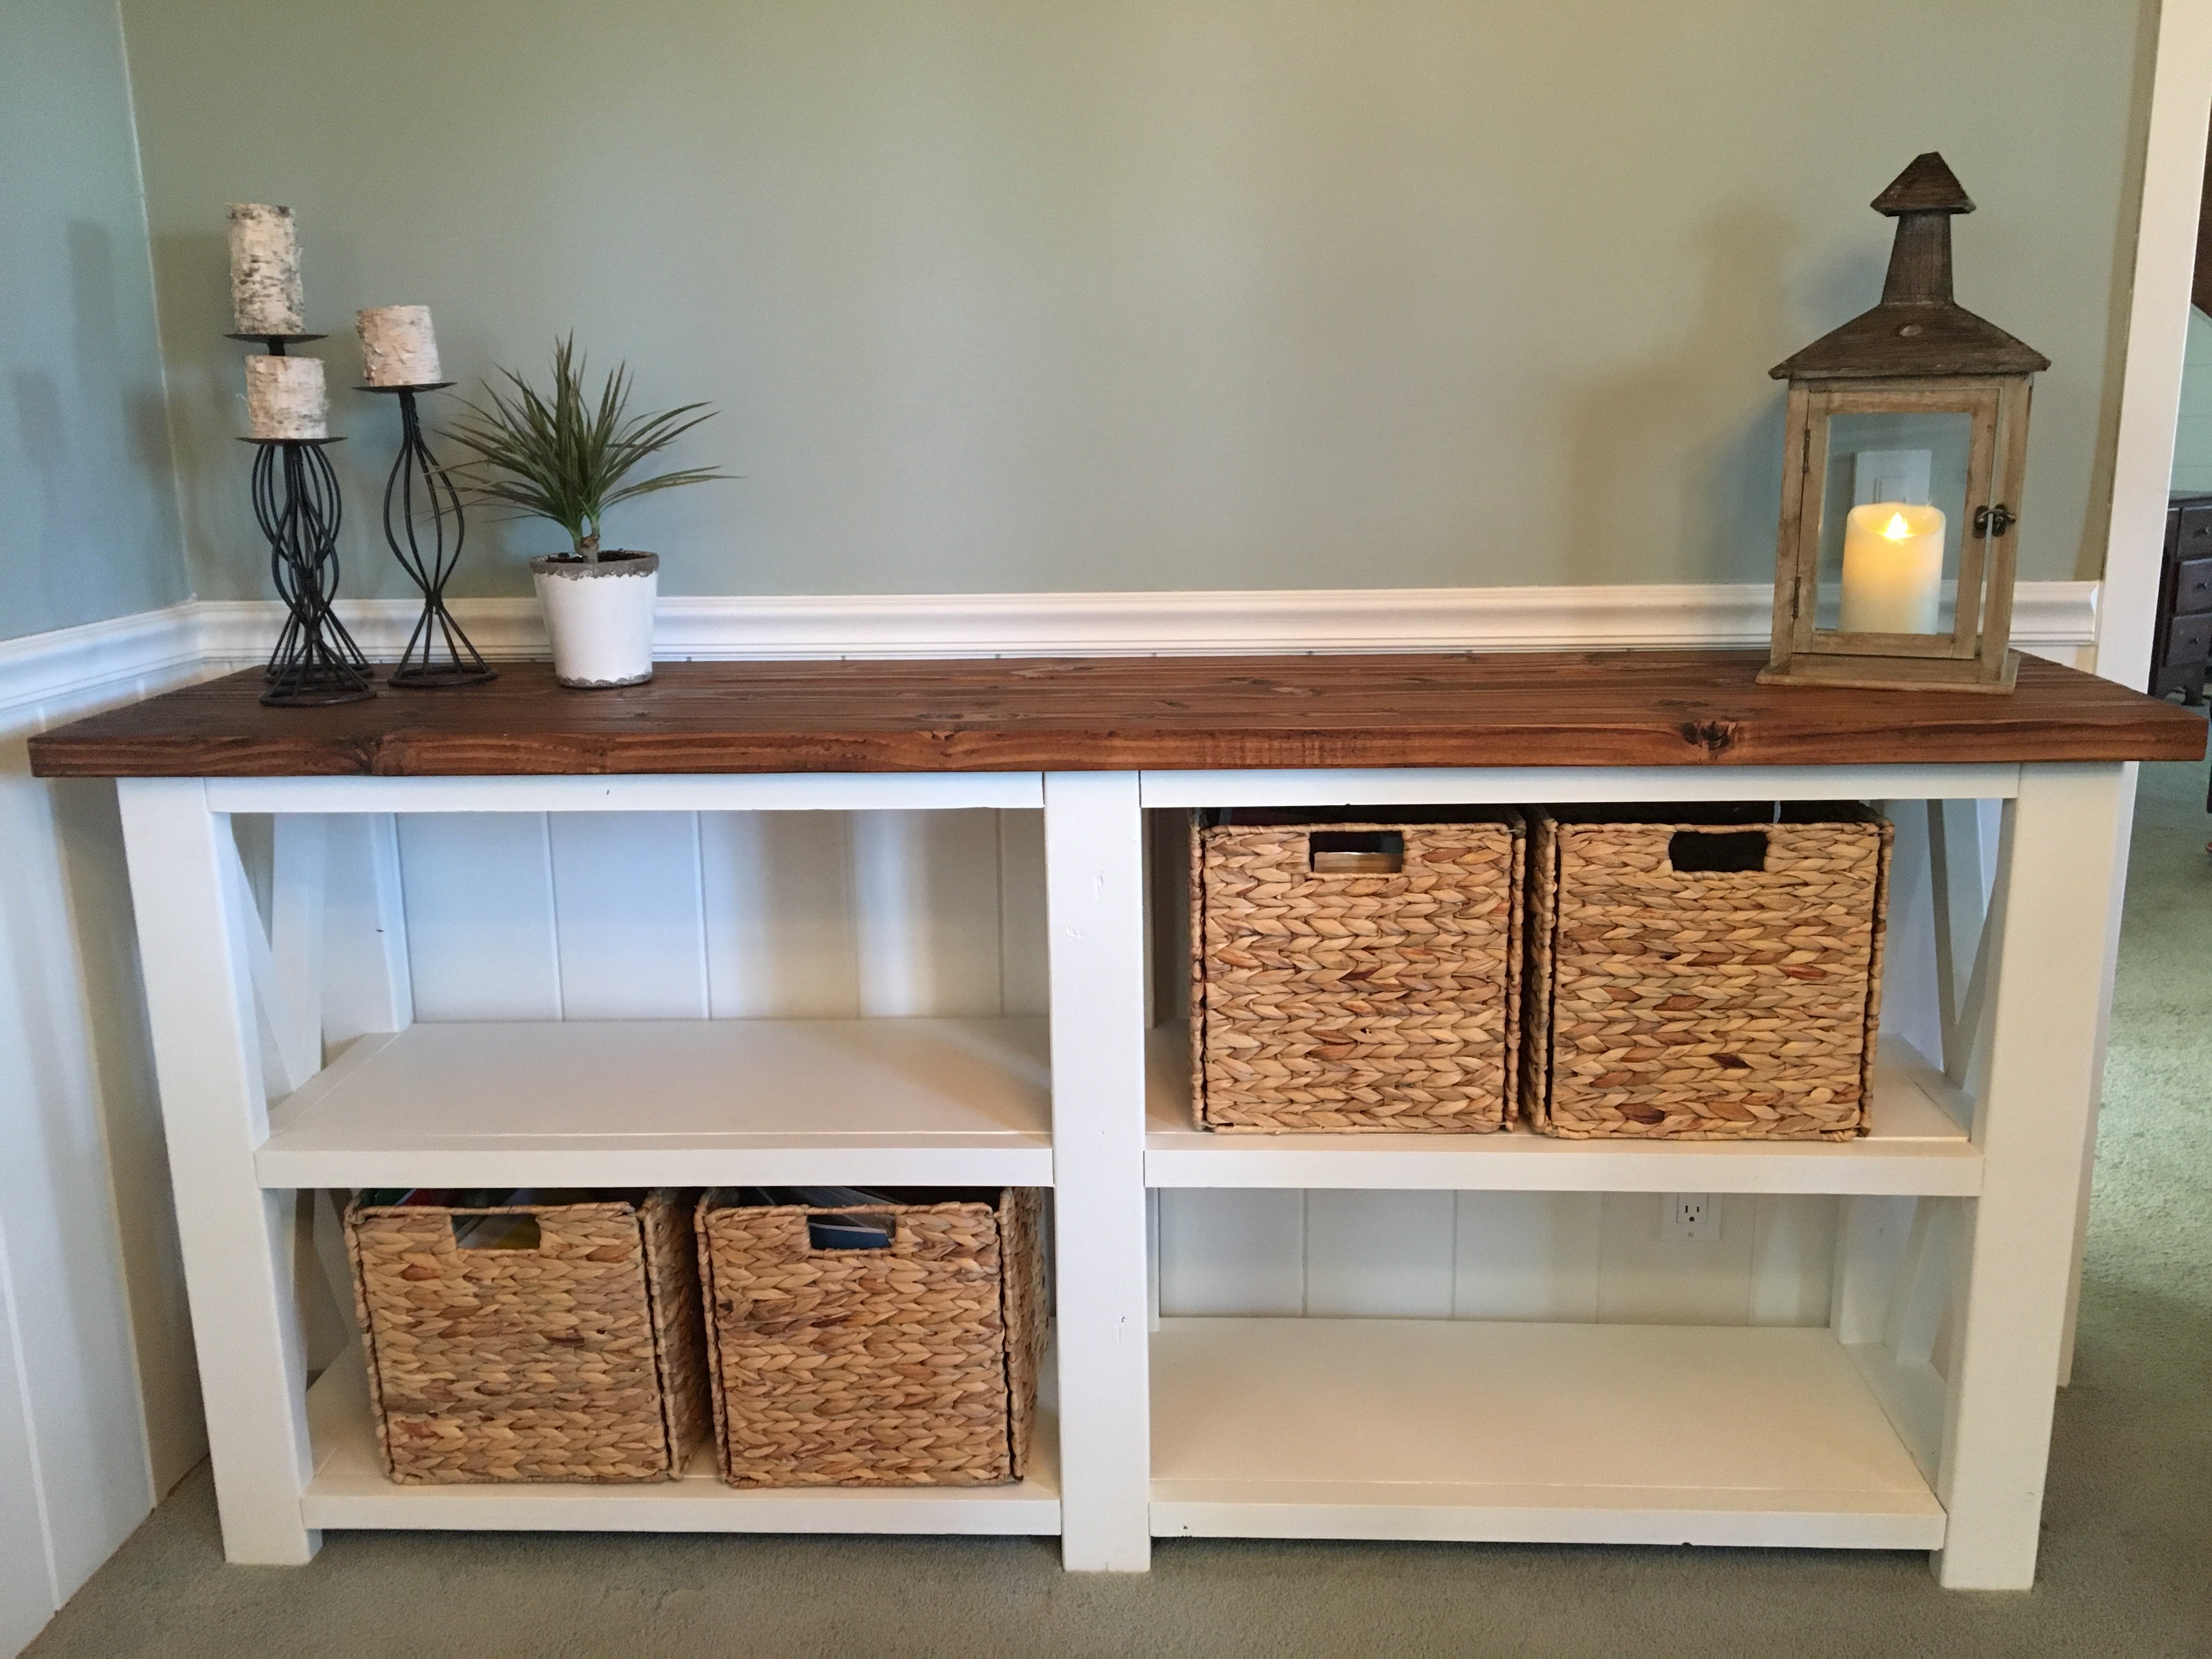 Ana White | Rustic X for a dining room console table - DIY Projects